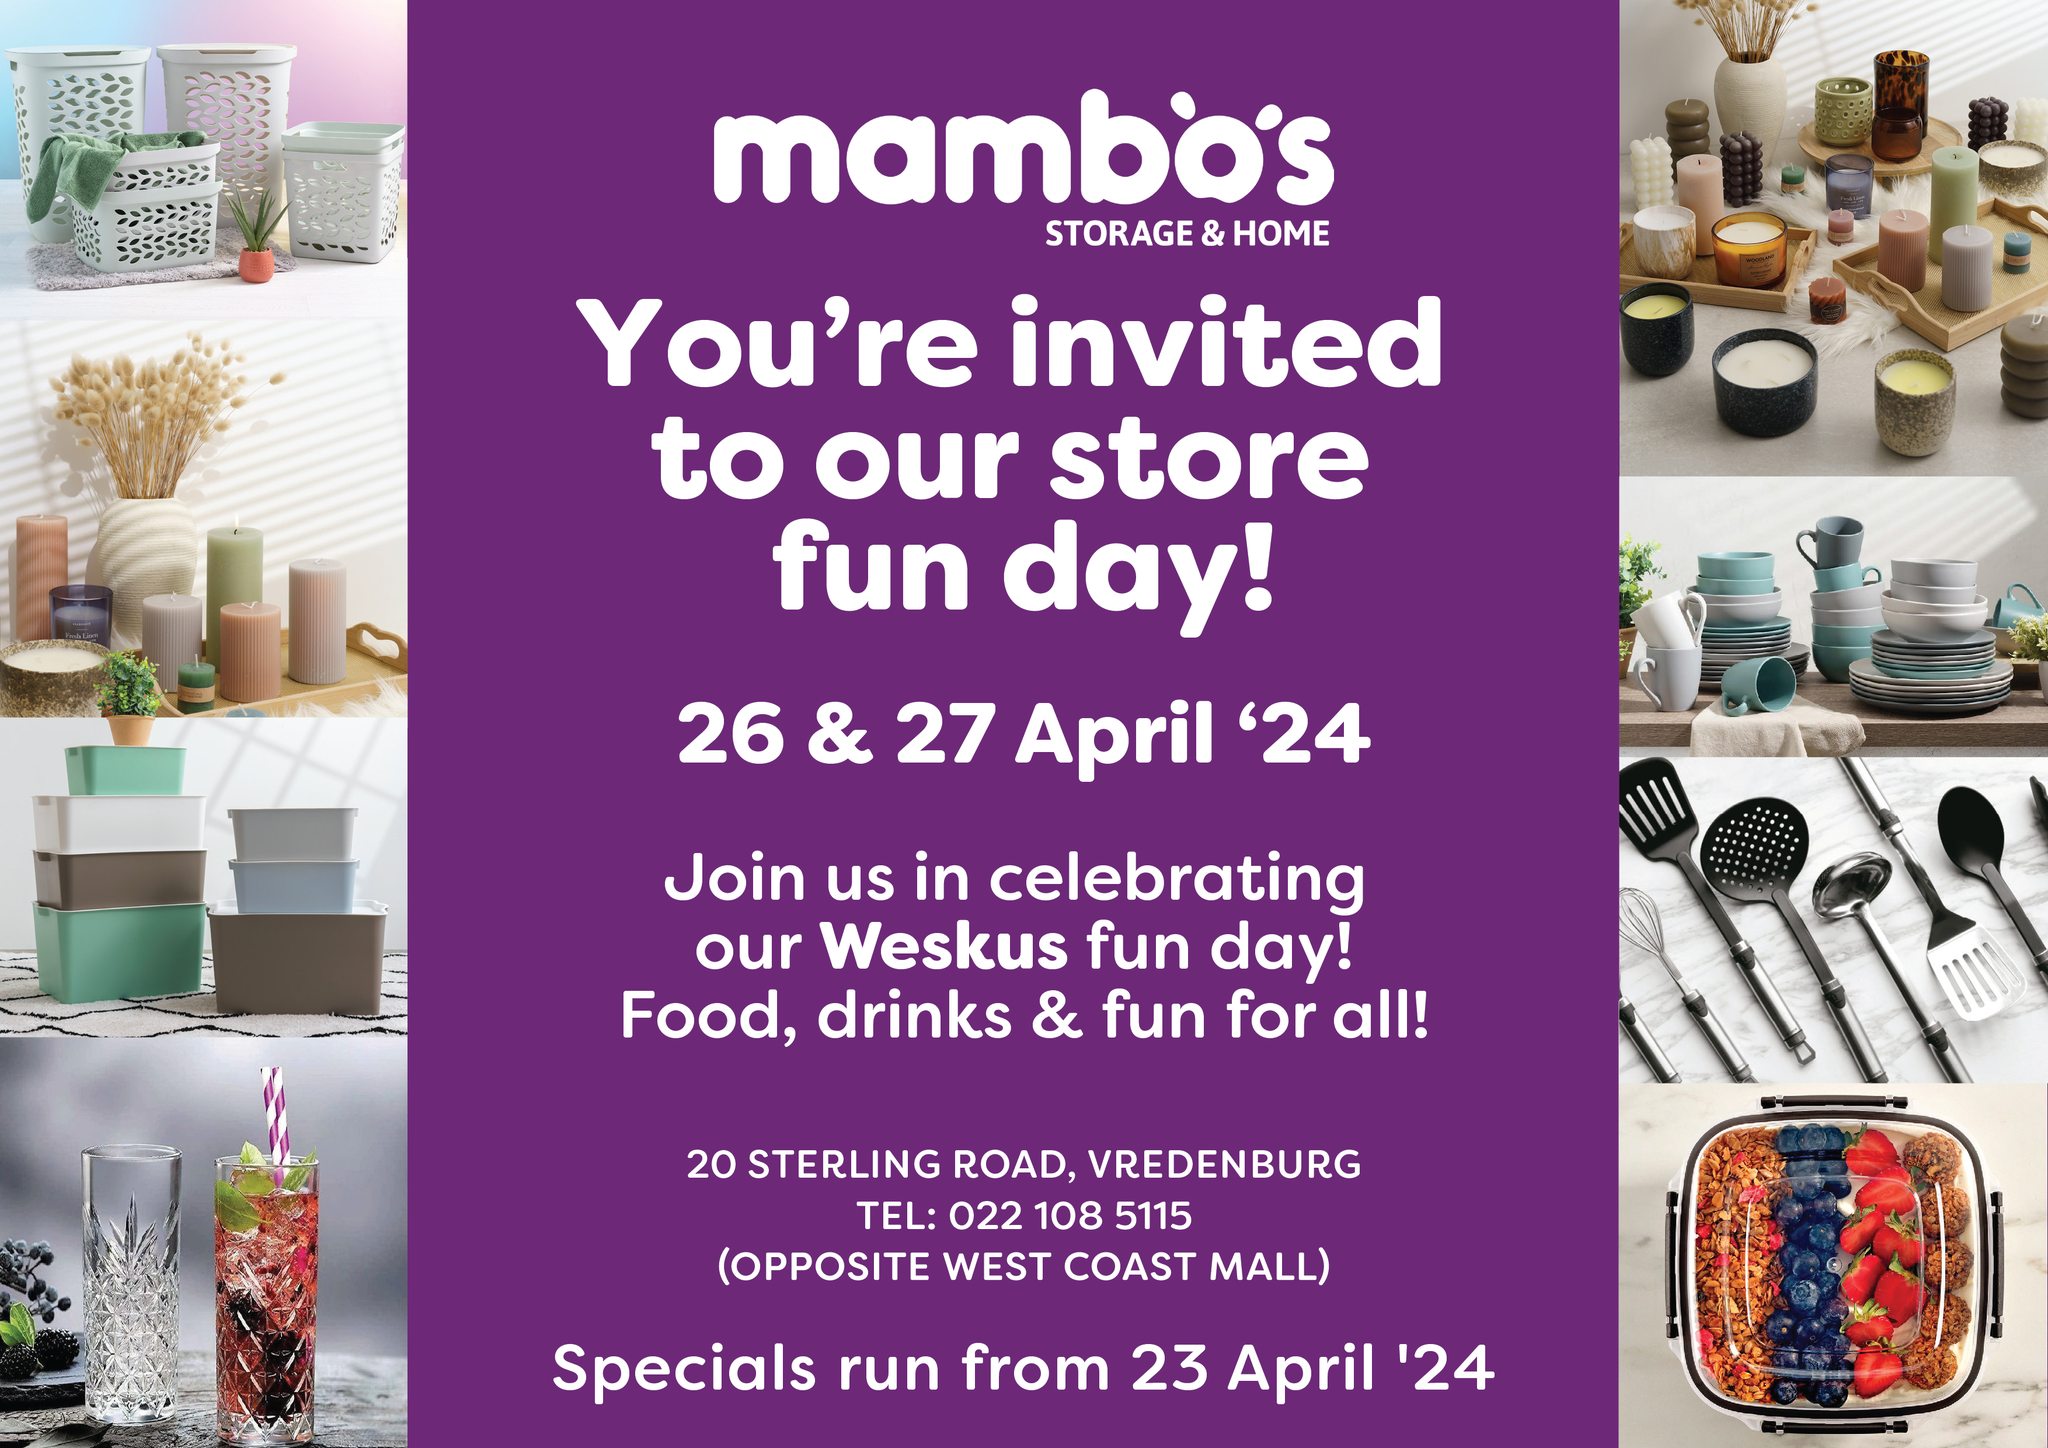 26 - 27 APRIL 2024 - MAMBO’S STORAGE AND HOME IS NOW OPEN OPPOSITE WEST COAST MALL NEXT TO  ACDC. GET ALL YOUR DAILY CLEANING AND TIDYING UP SORTED WITH THEIR INCREDIBLE OPENING  SPECIALS.   JOIN US ON  27TH  SATURDAY AT MAMBO’S STORAGE & HOME FROM 10AM - 3PM  OPPOSITE THE WEST COAST MALL FOR A FUN FILLED DAY OF GREAT SPECIALS, SCRUMPTIOUS BOERIE  ROLLS, CANDY FLOSS AND OTHER SWEET TREATS AND FUN FOR THE KIDS.  MAKE YOUR HOME YOUR HAPPY ZONE.